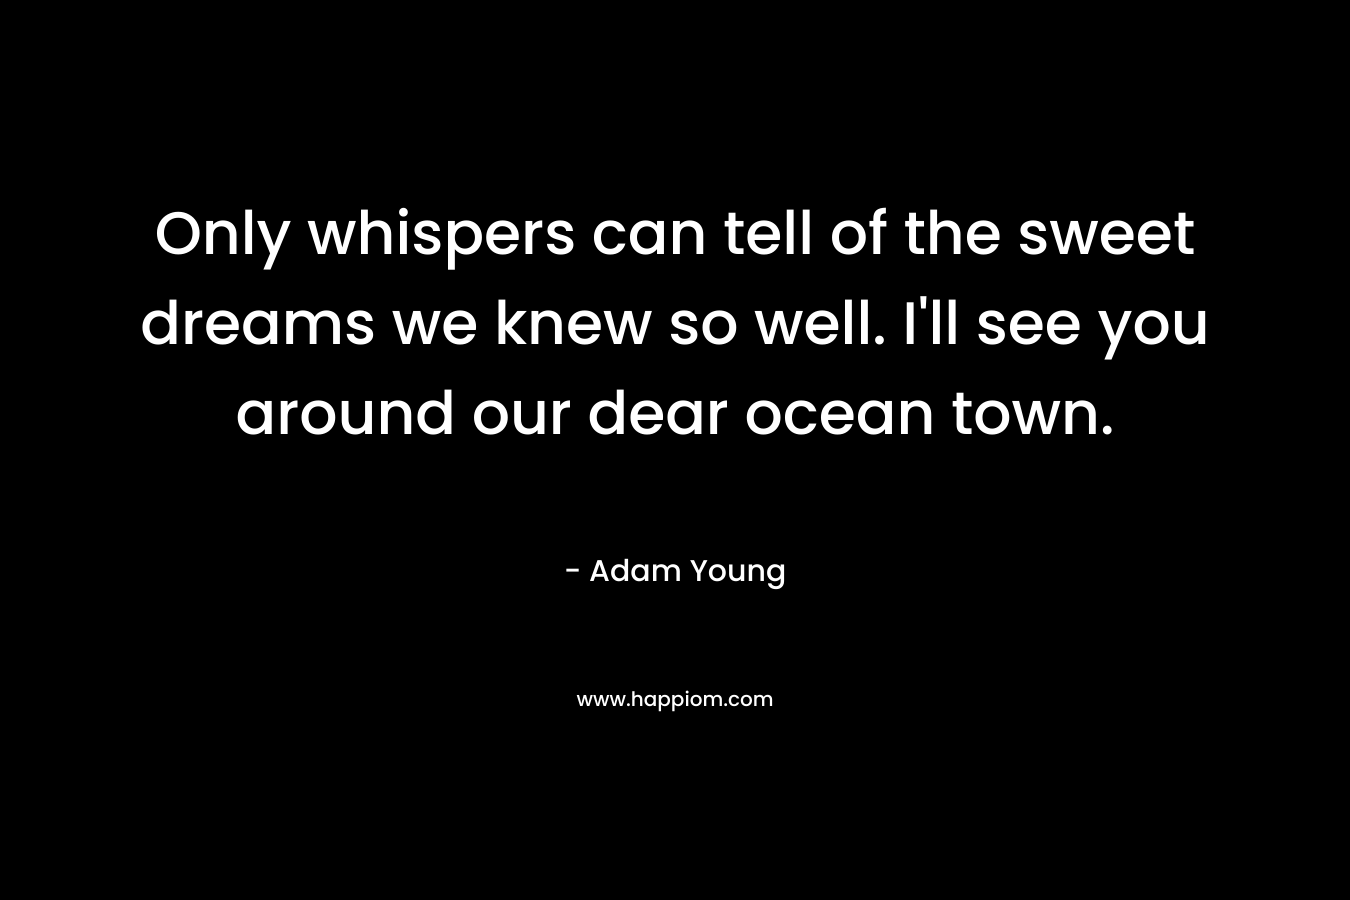 Only whispers can tell of the sweet dreams we knew so well. I’ll see you around our dear ocean town. – Adam Young